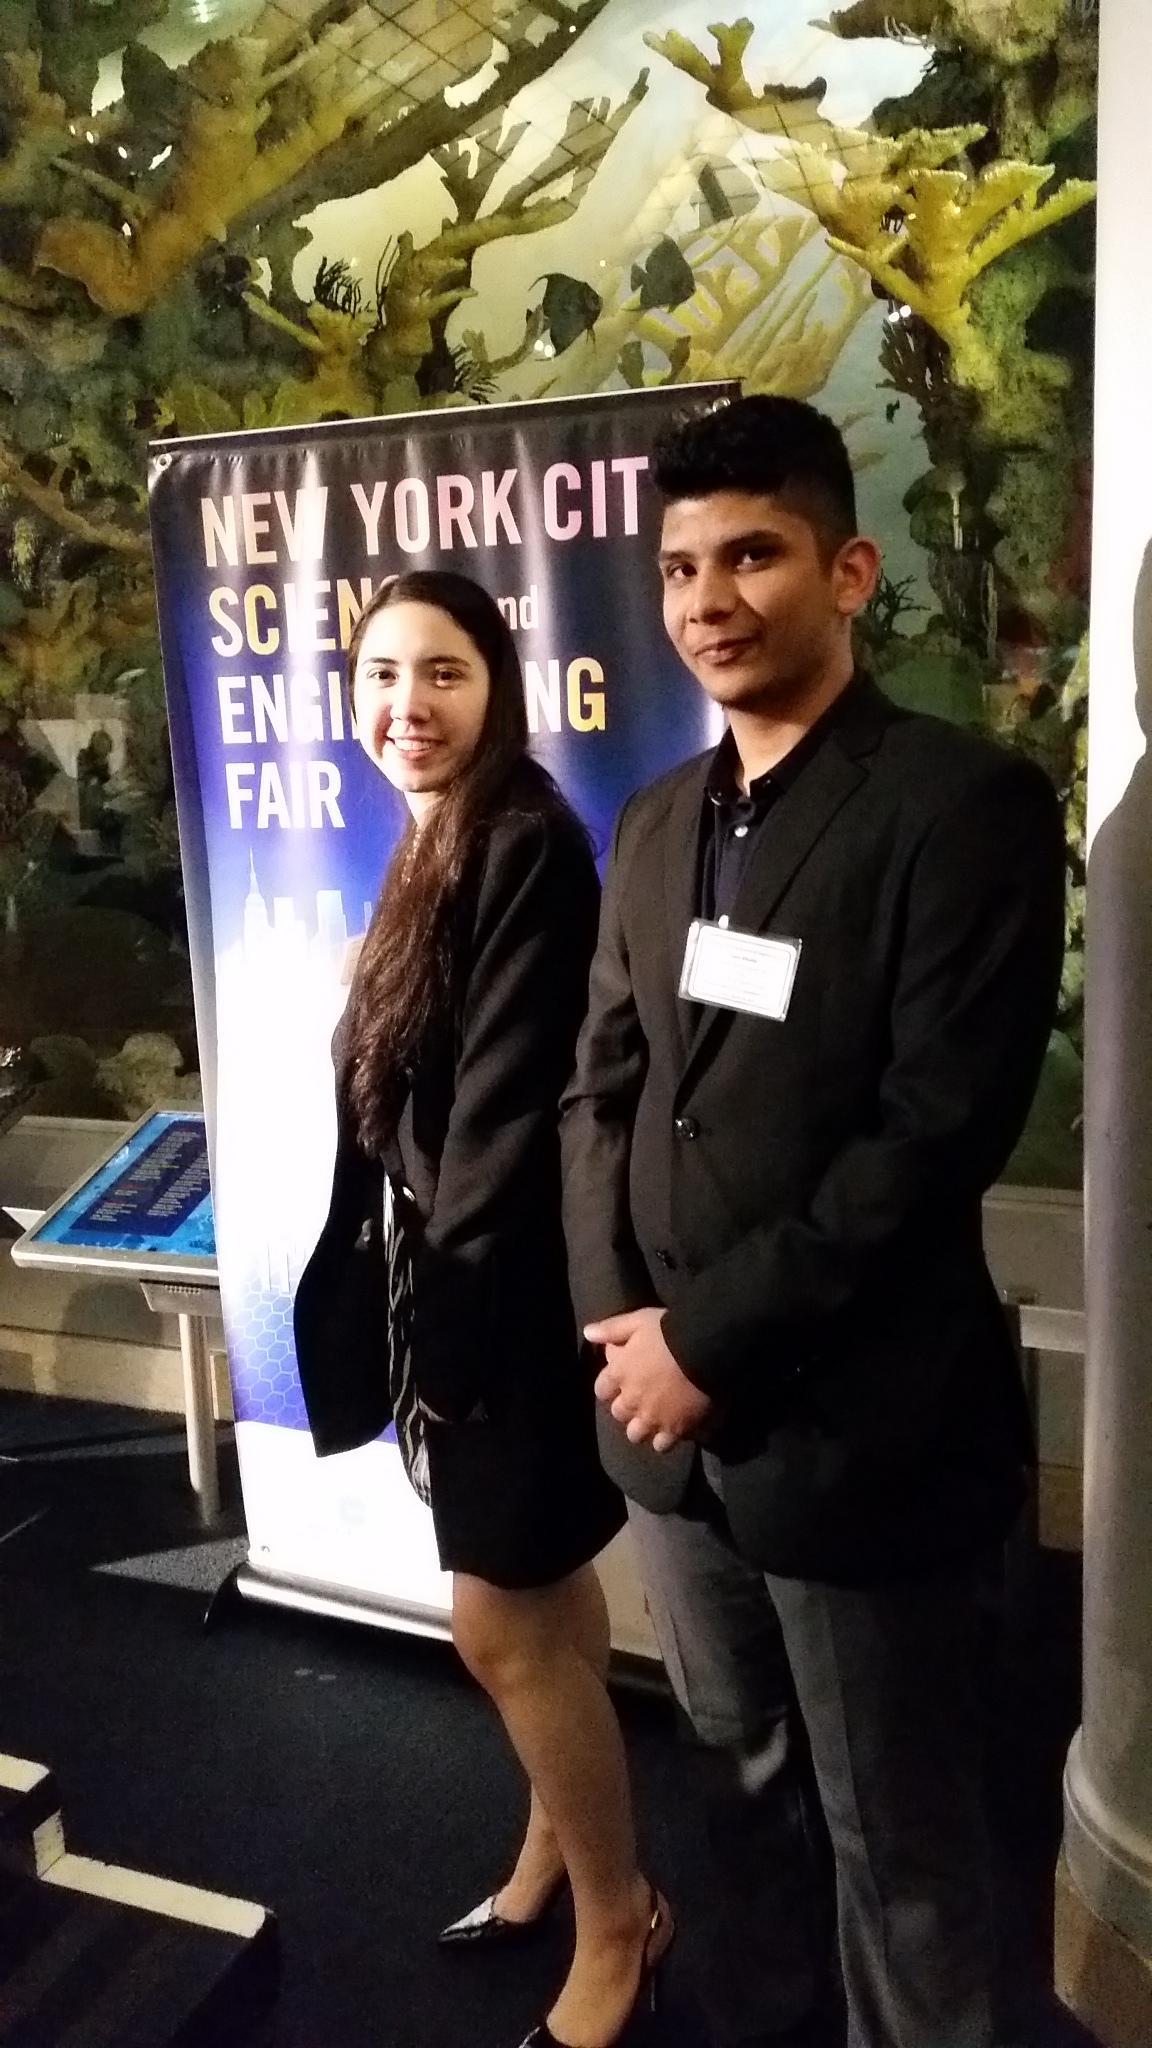 Cezanne Bies and Zain Bin Khalid present at the Finals round of the NYC Science and Engineering Fair. They eventually went on to win 3rd prize.